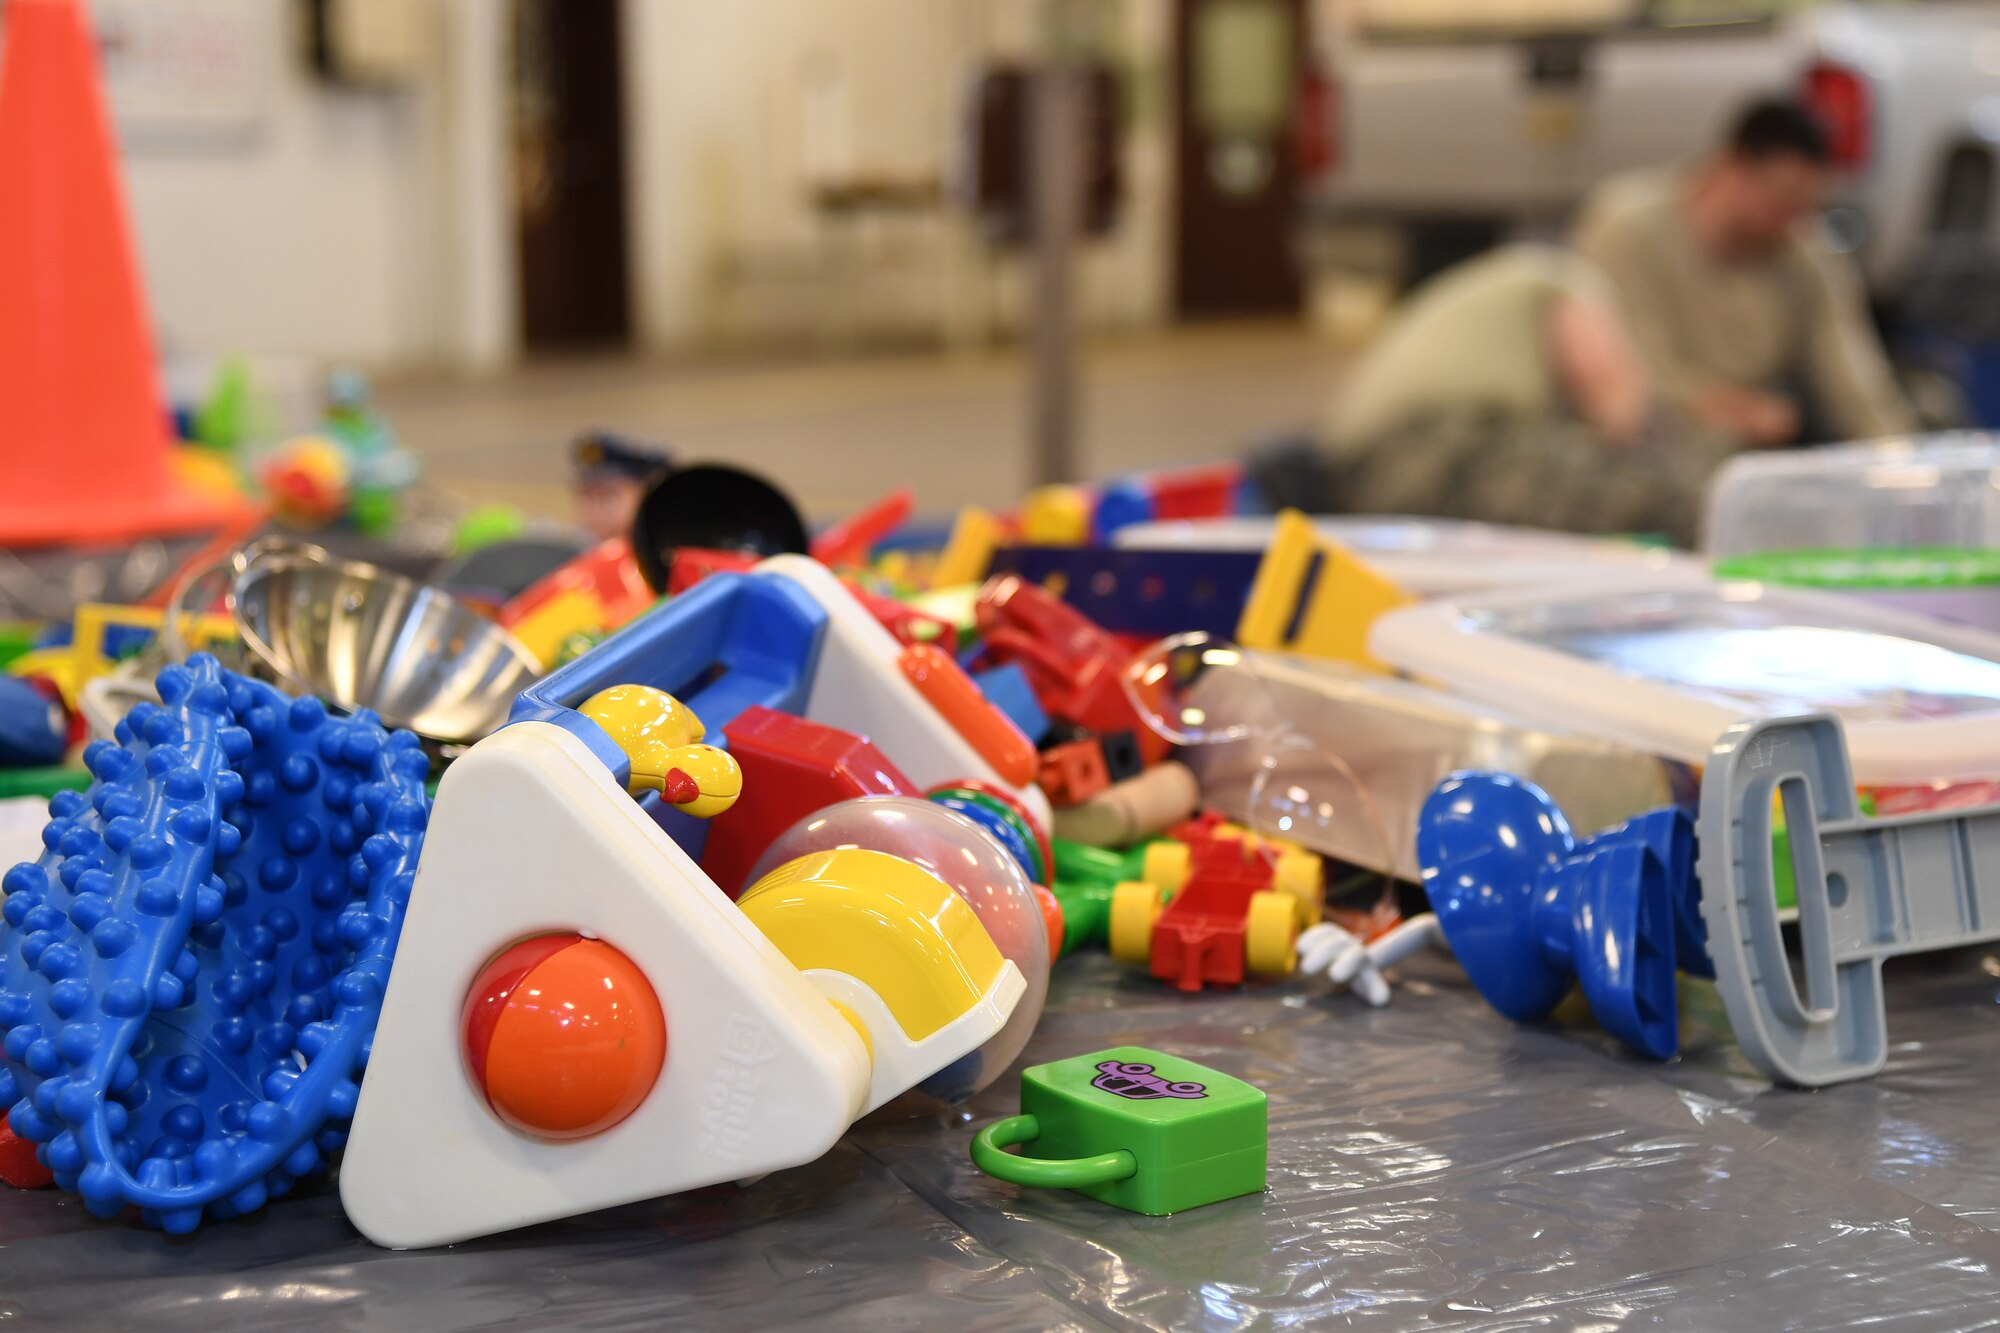 Toys air-dry after going through a sanitation process to include a bleach-solution soak, soapy water scrub, and final rinse January 18, 2019, on Grand Forks Air Force Base, North Dakota. More than 20 Airmen with the 319th Logistics Readiness Squadron worked transferring toys between each station, scrubbing toys of all sizes and ensuring each nook and cranny was dry prior to being returned to their origins- the base Child Development Center and Youth Programs. The toys needed to be cleaned after several Grand Forks AFB family members and personnel came down with a highly-contagious gastrointestinal virus, which spread to the CDC and other high-traffic areas. (U.S. Air Force photo by Senior Airman Elora J. Martinez)